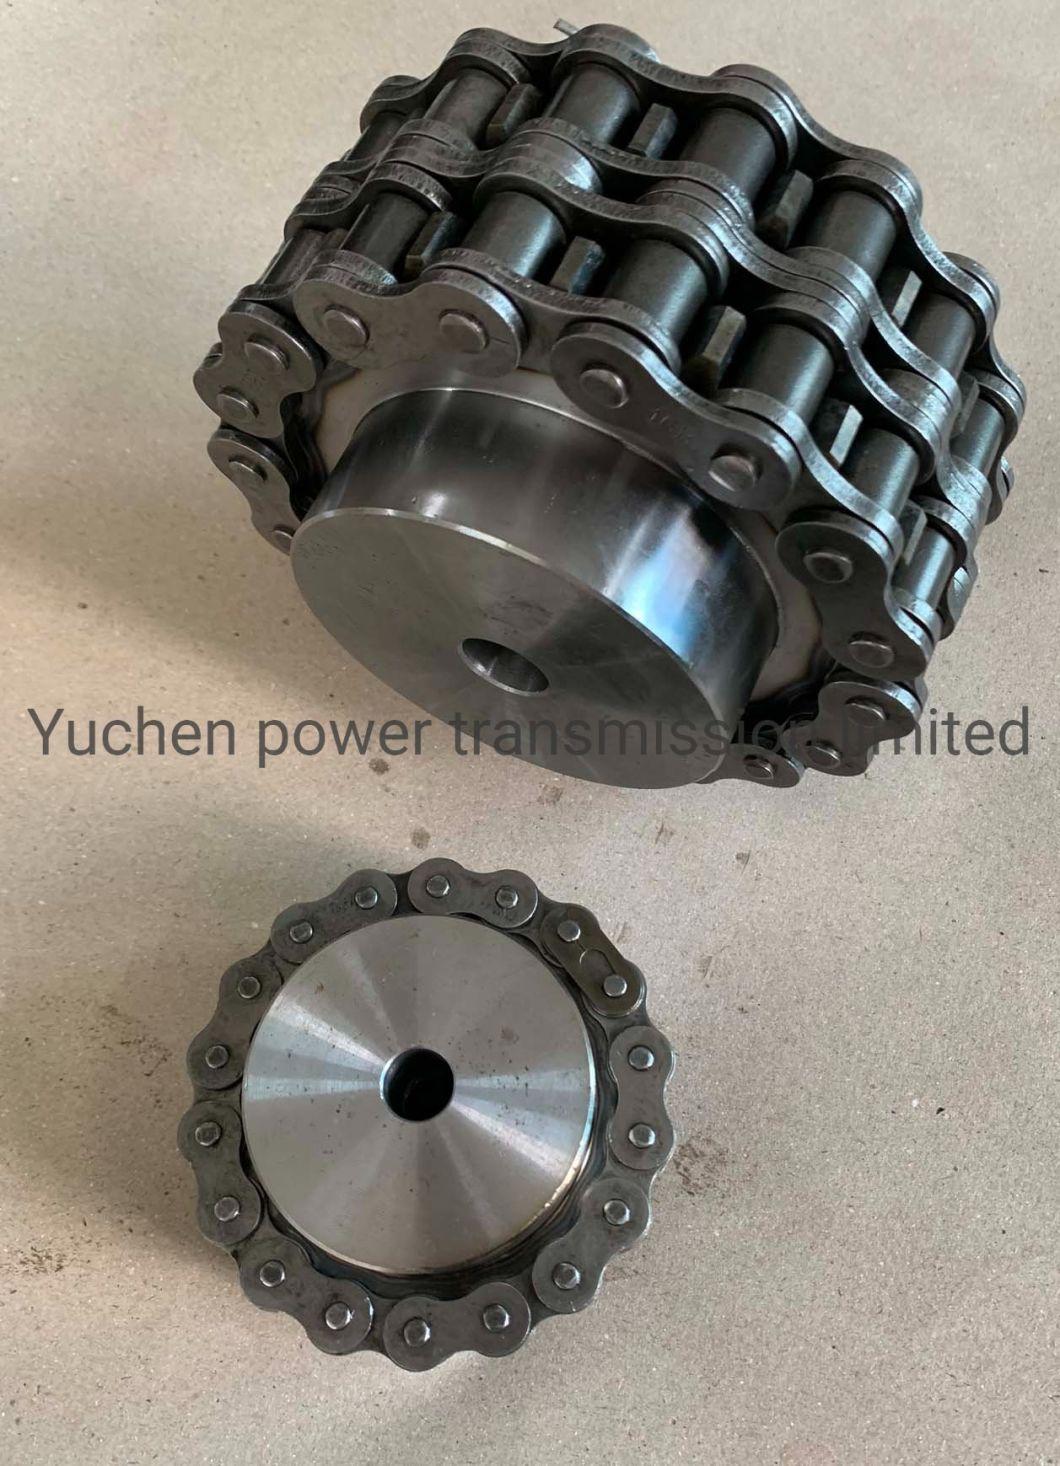 Chain Coupling of 12b-2 Double Chain with Sprocket for Power Transmission